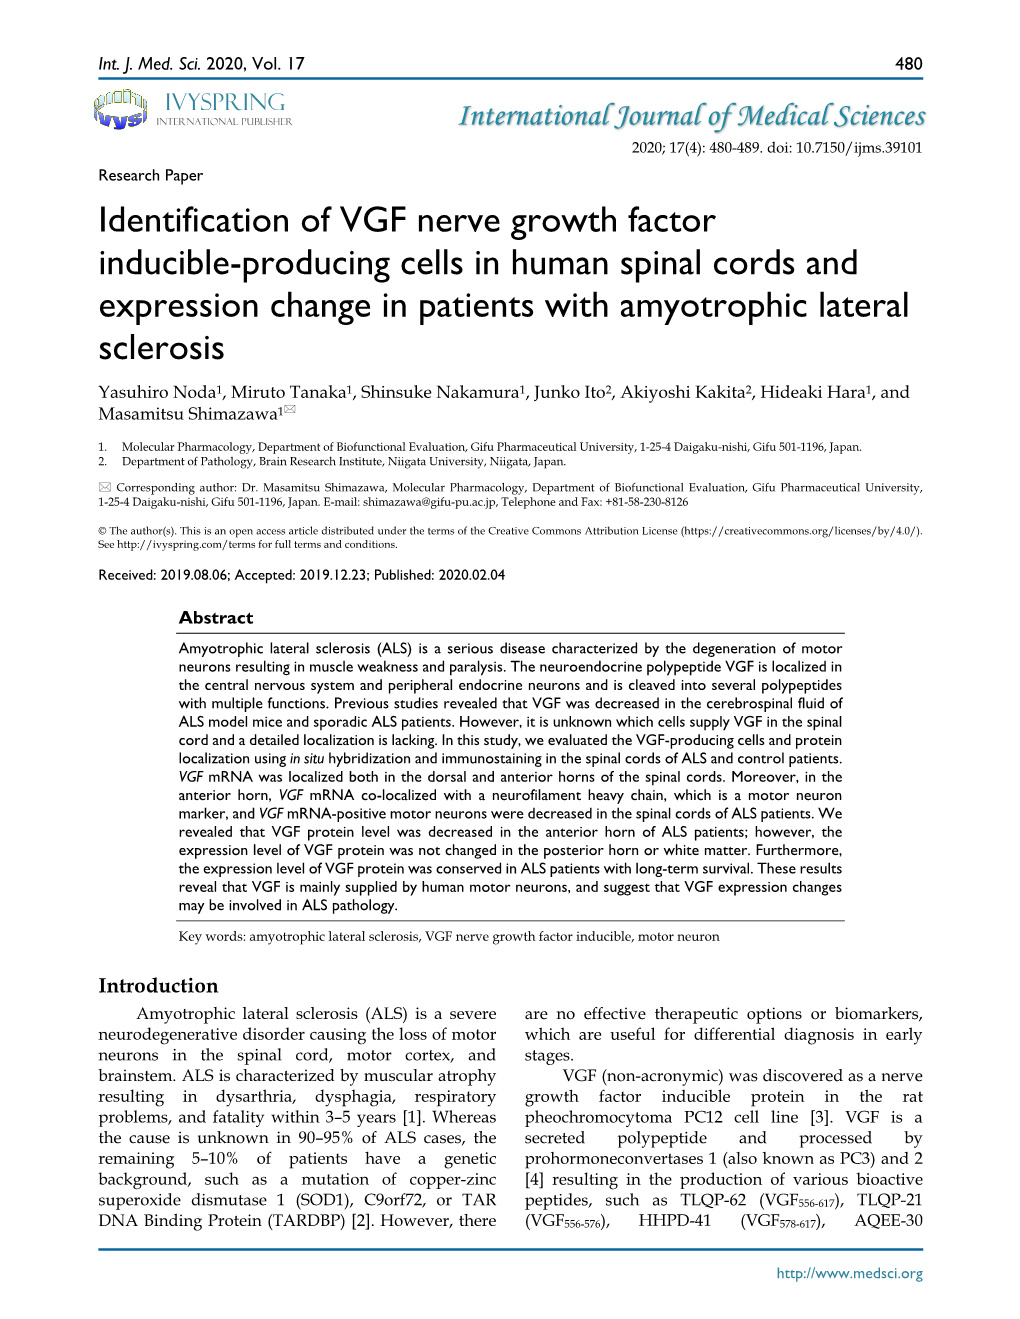 Identification of VGF Nerve Growth Factor Inducible-Producing Cells In